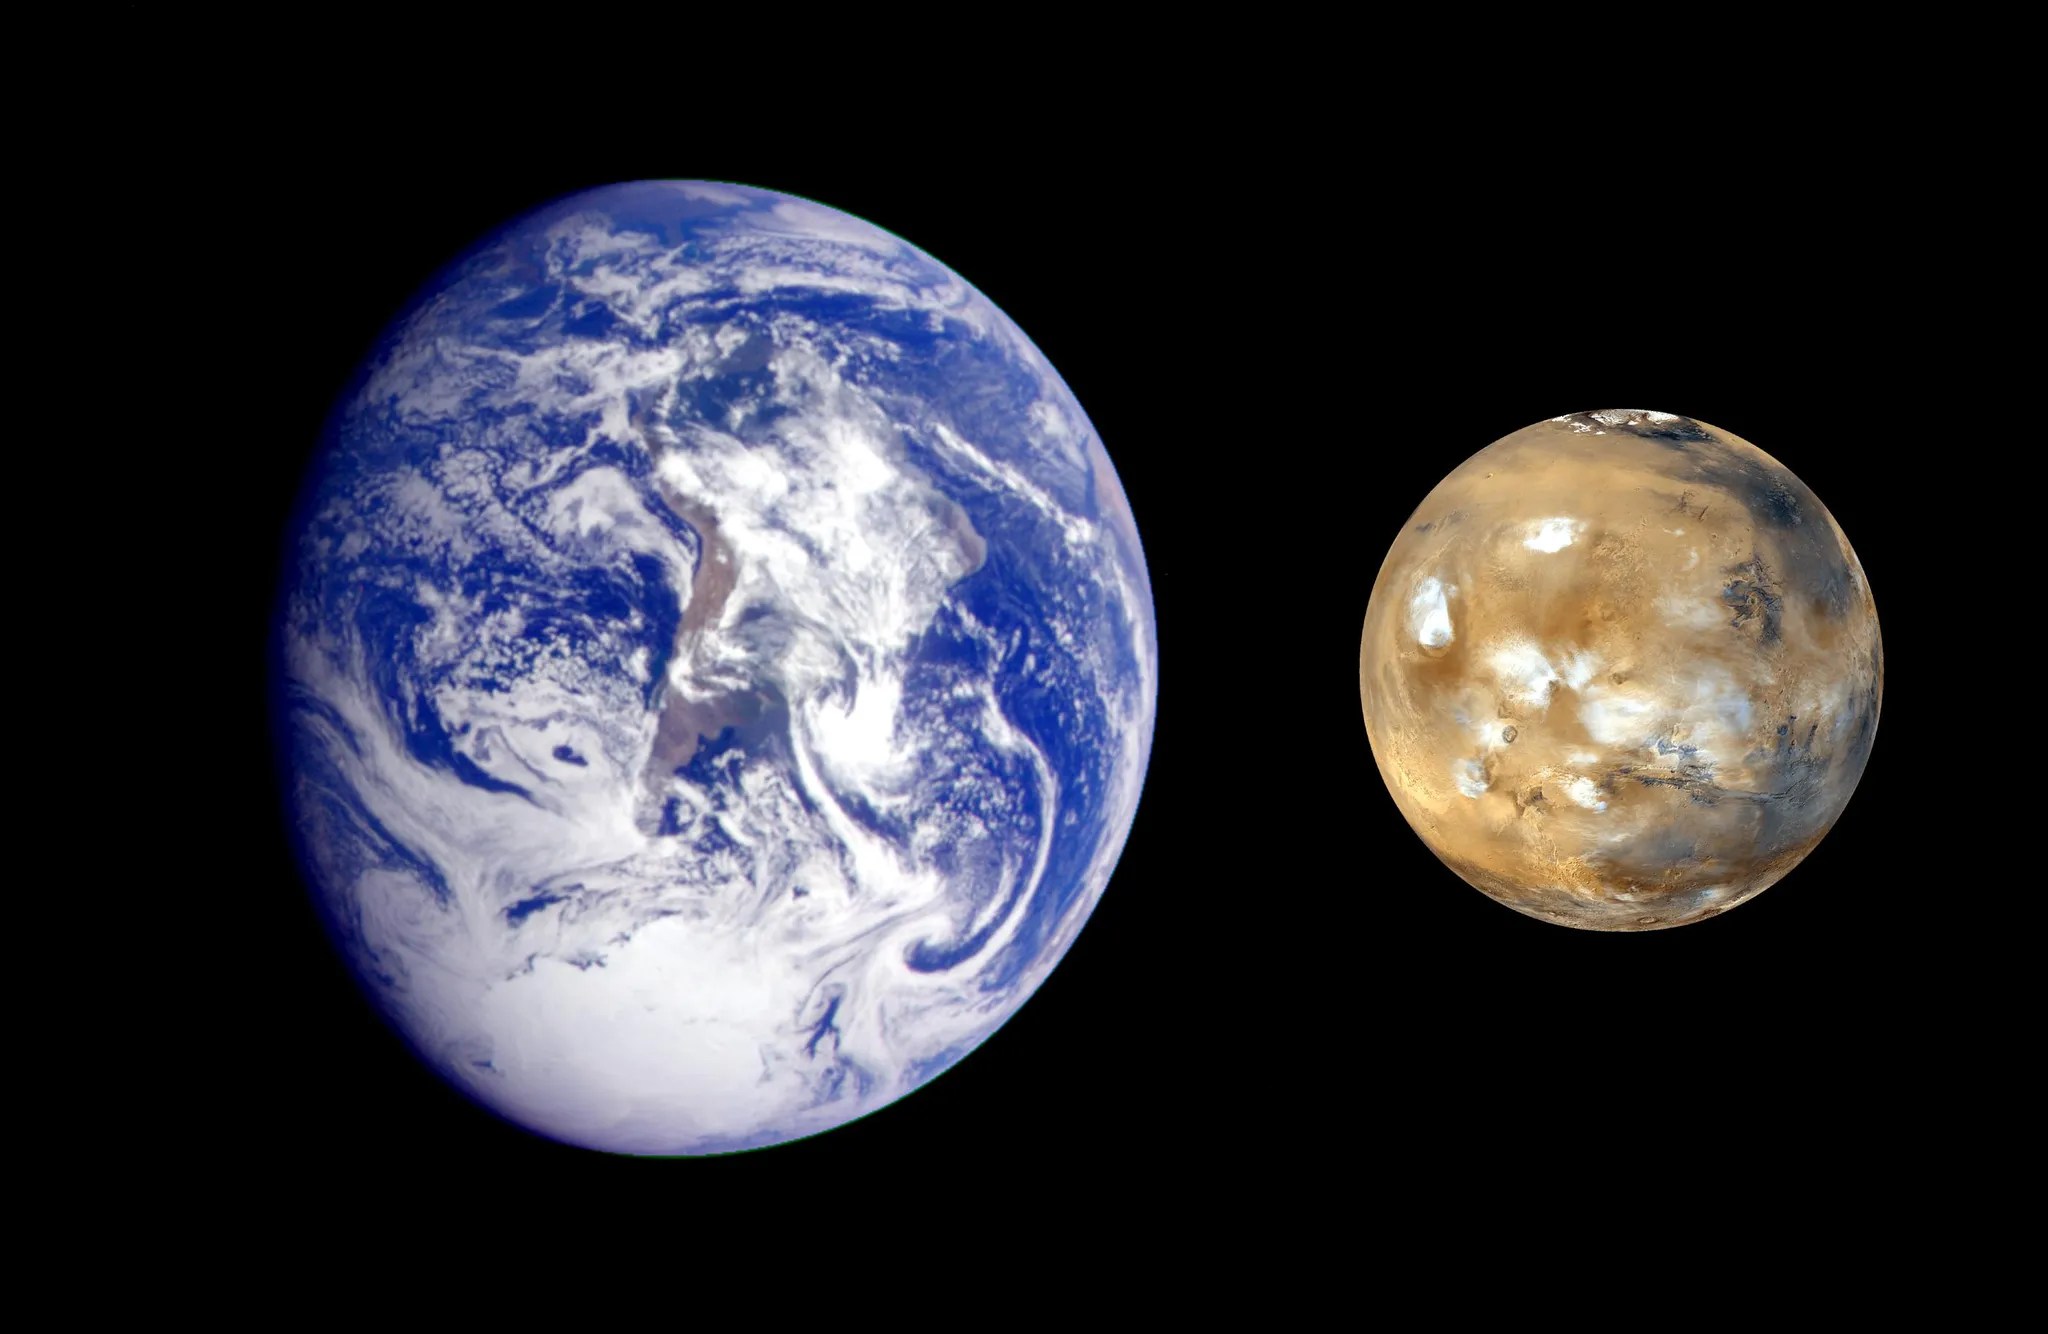 A composite image of Earth and Mars was created to allow viewers to gain a better understanding of the relative sizes of the two planets.